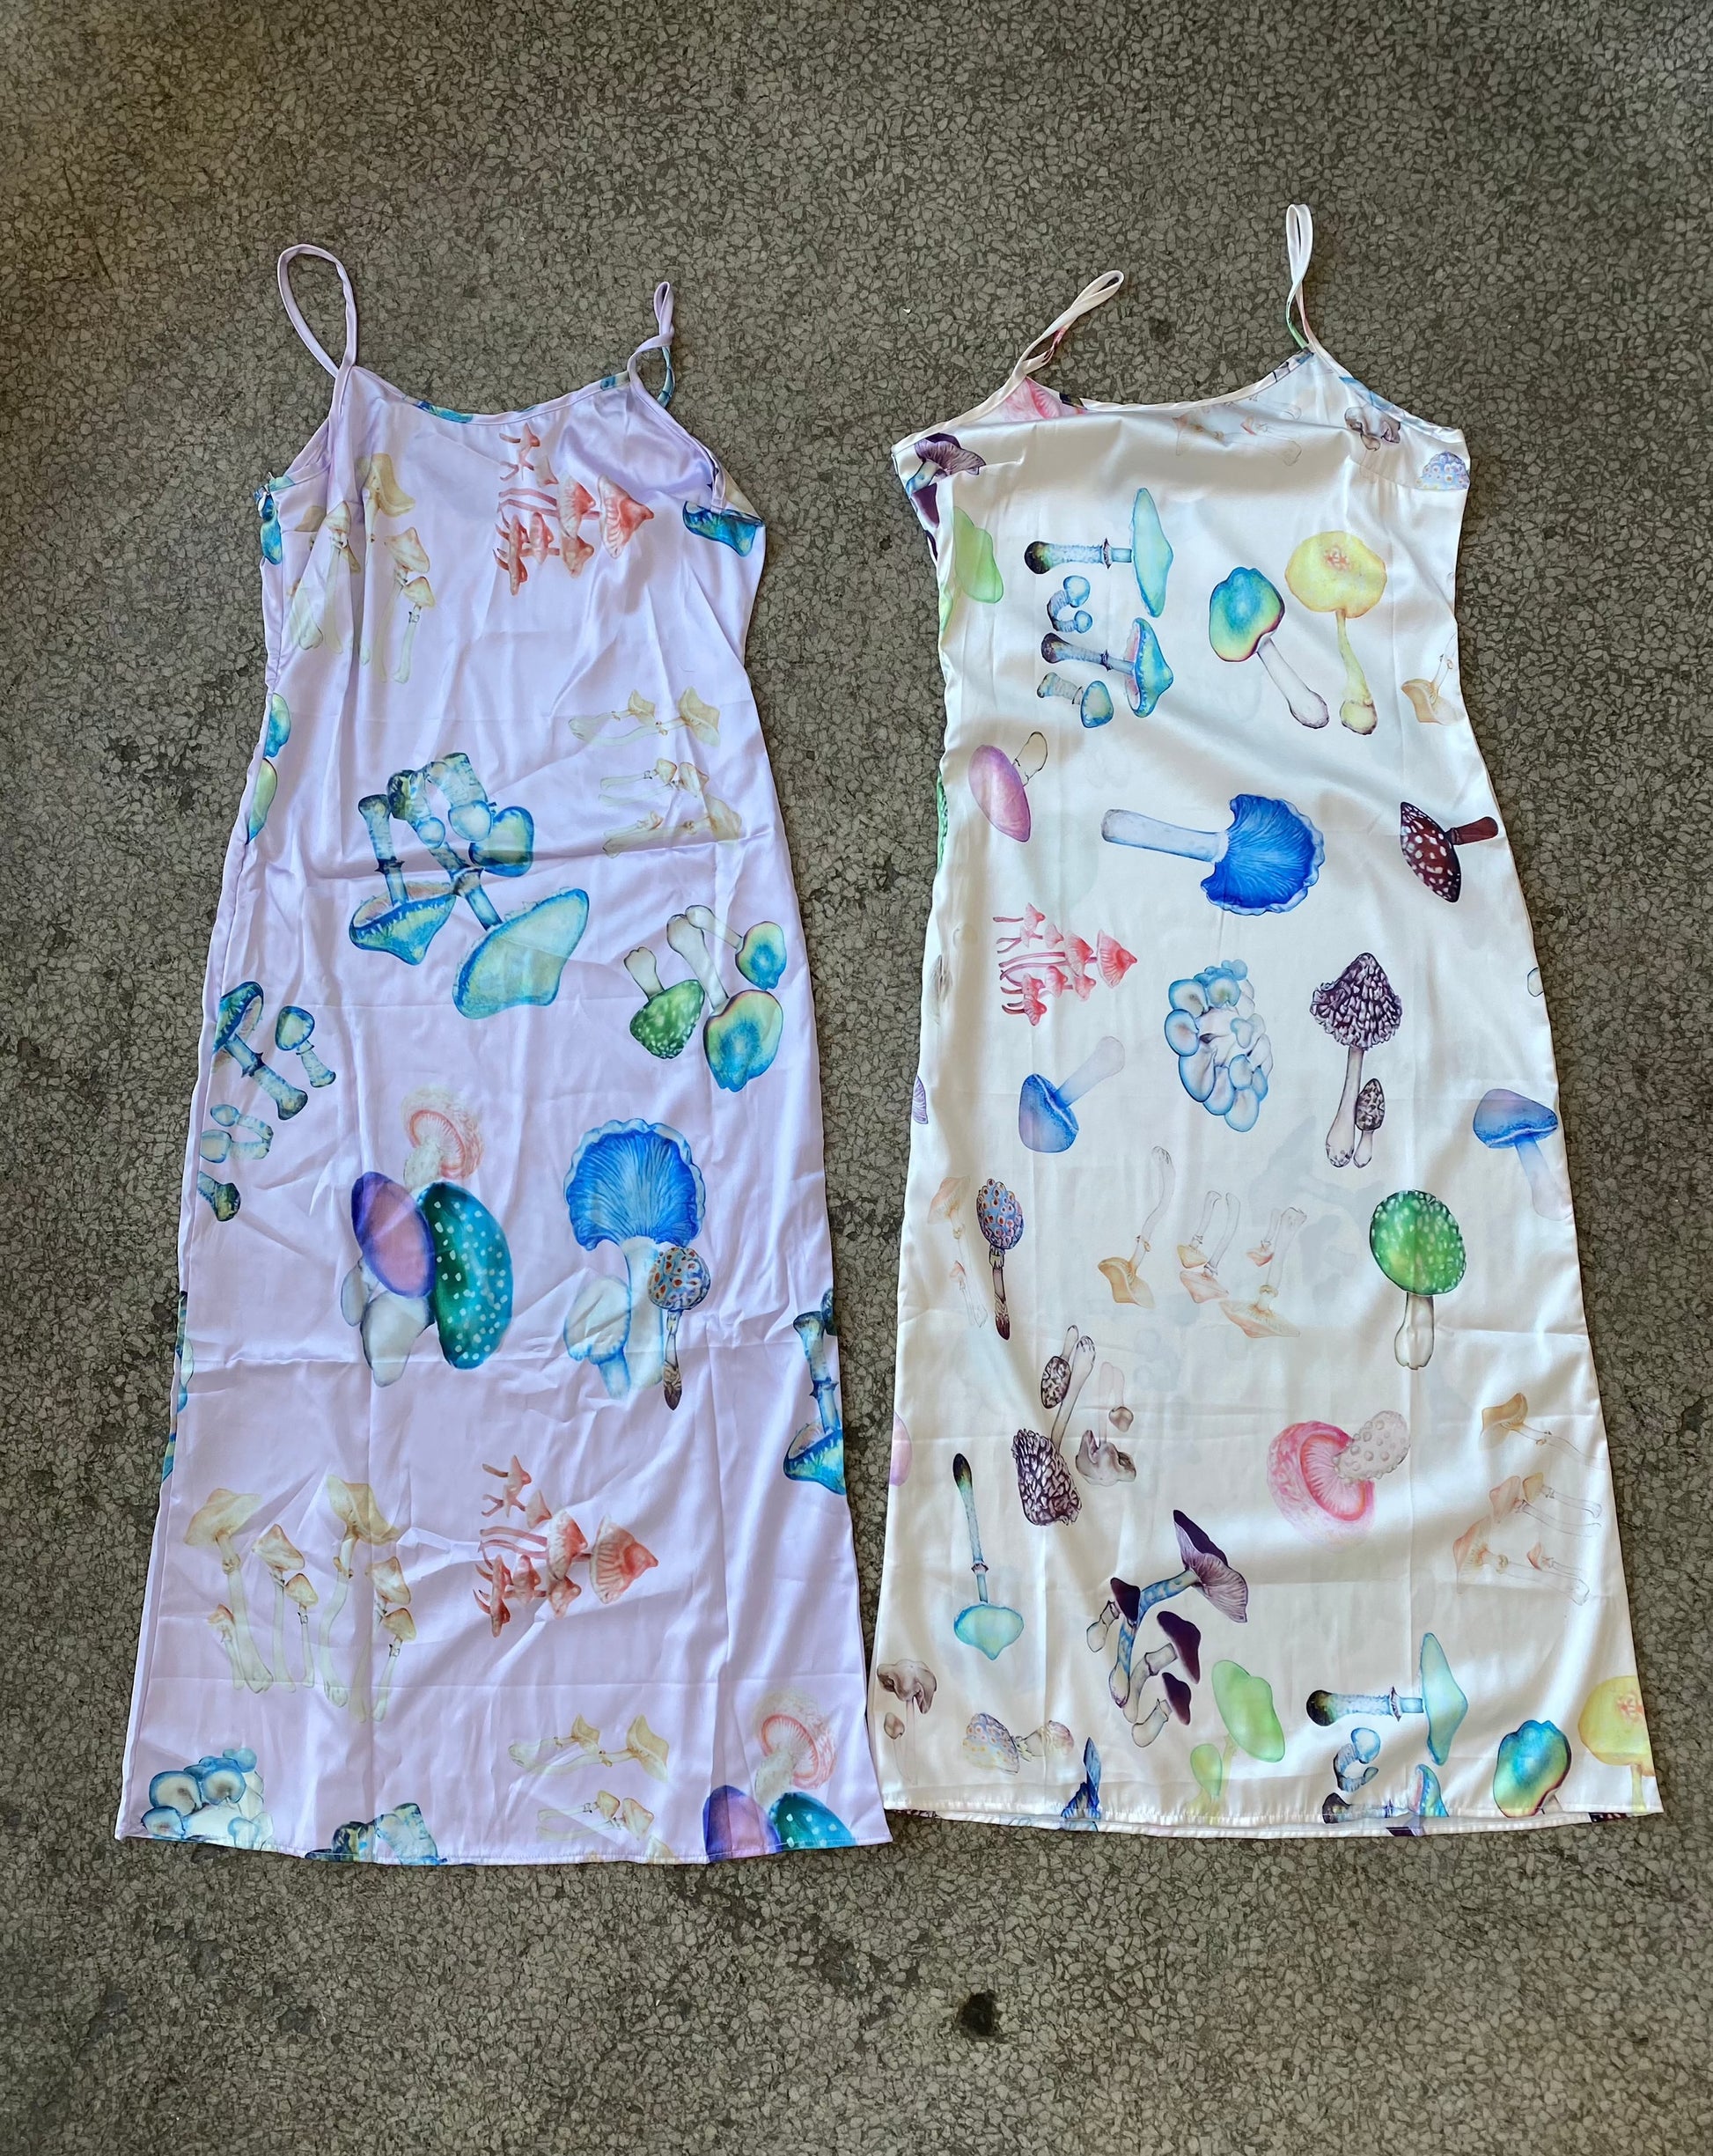 two slip dresses lay side by side on the concrete floor, one is lilac with a psychedlic mushroom print and the other has a pink base with a similar mushroom print